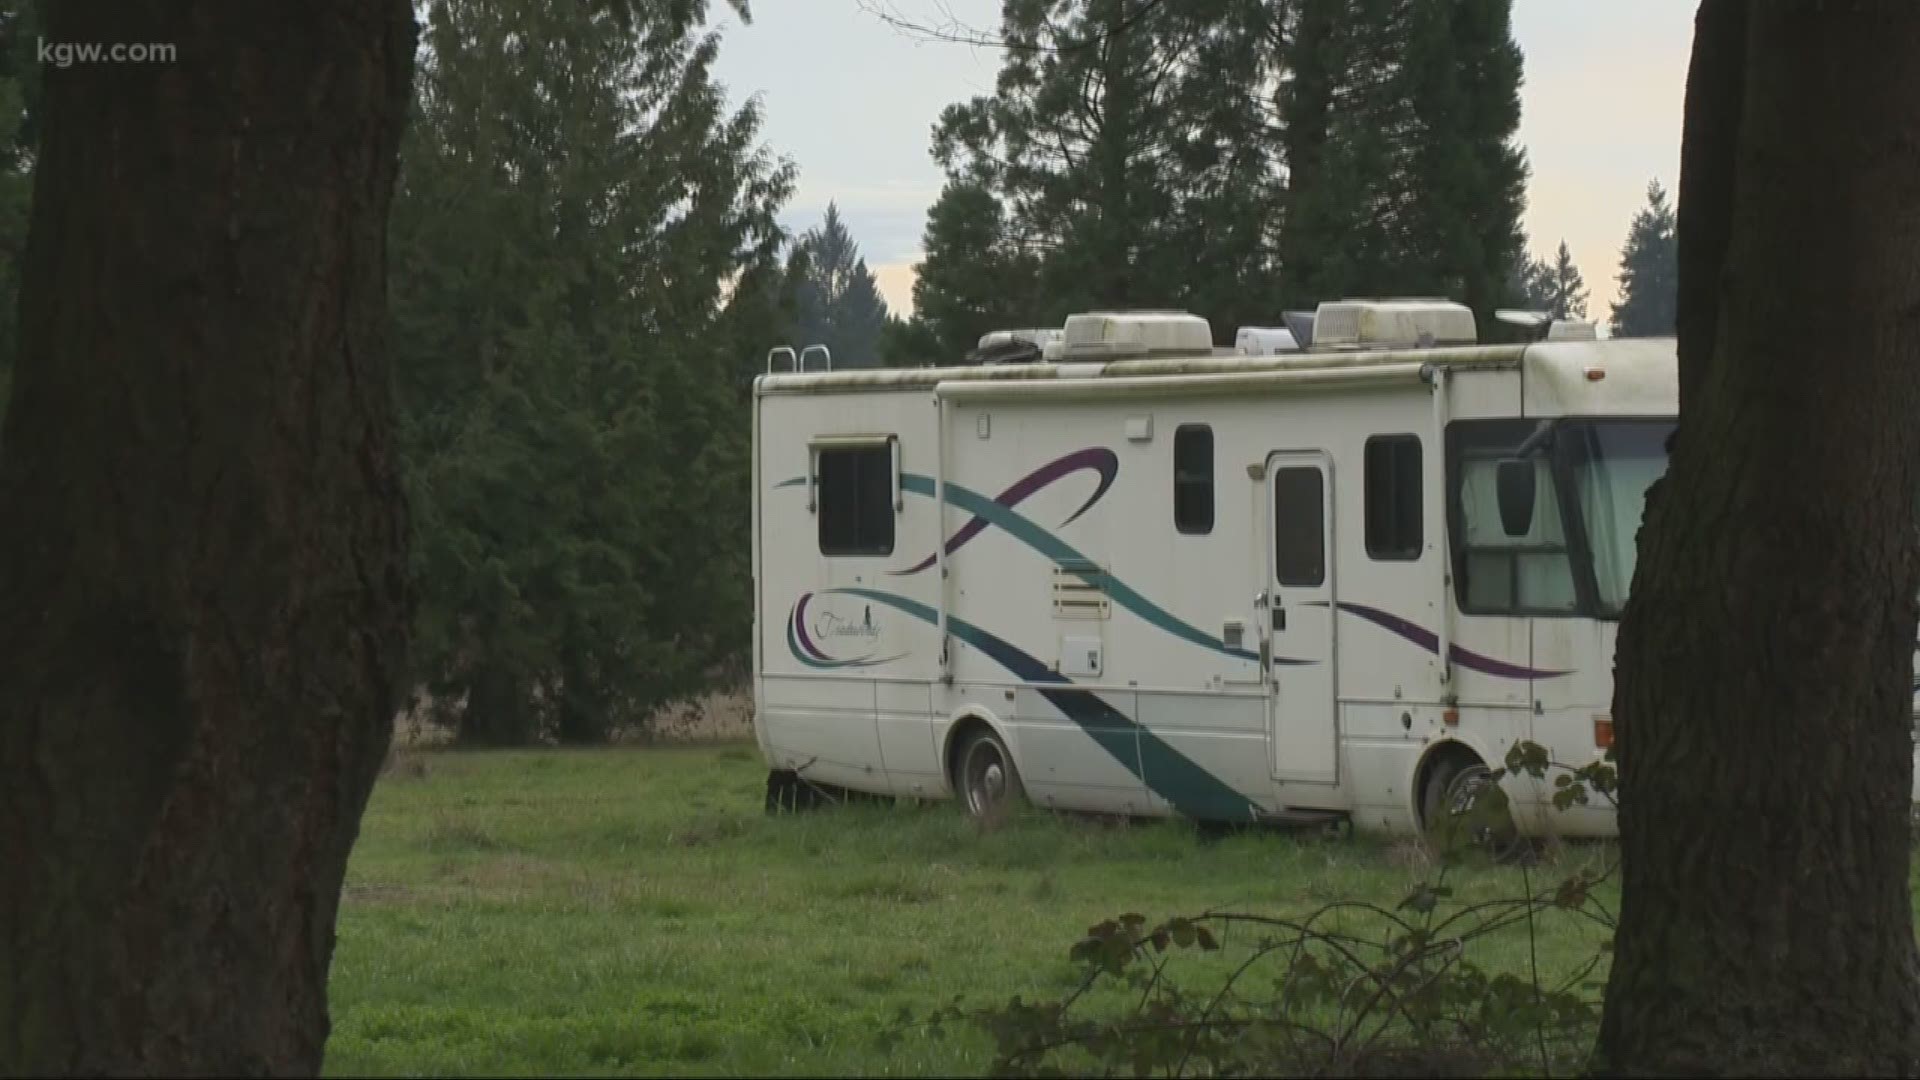 A local couple is showing the "other side" of live in an RV.